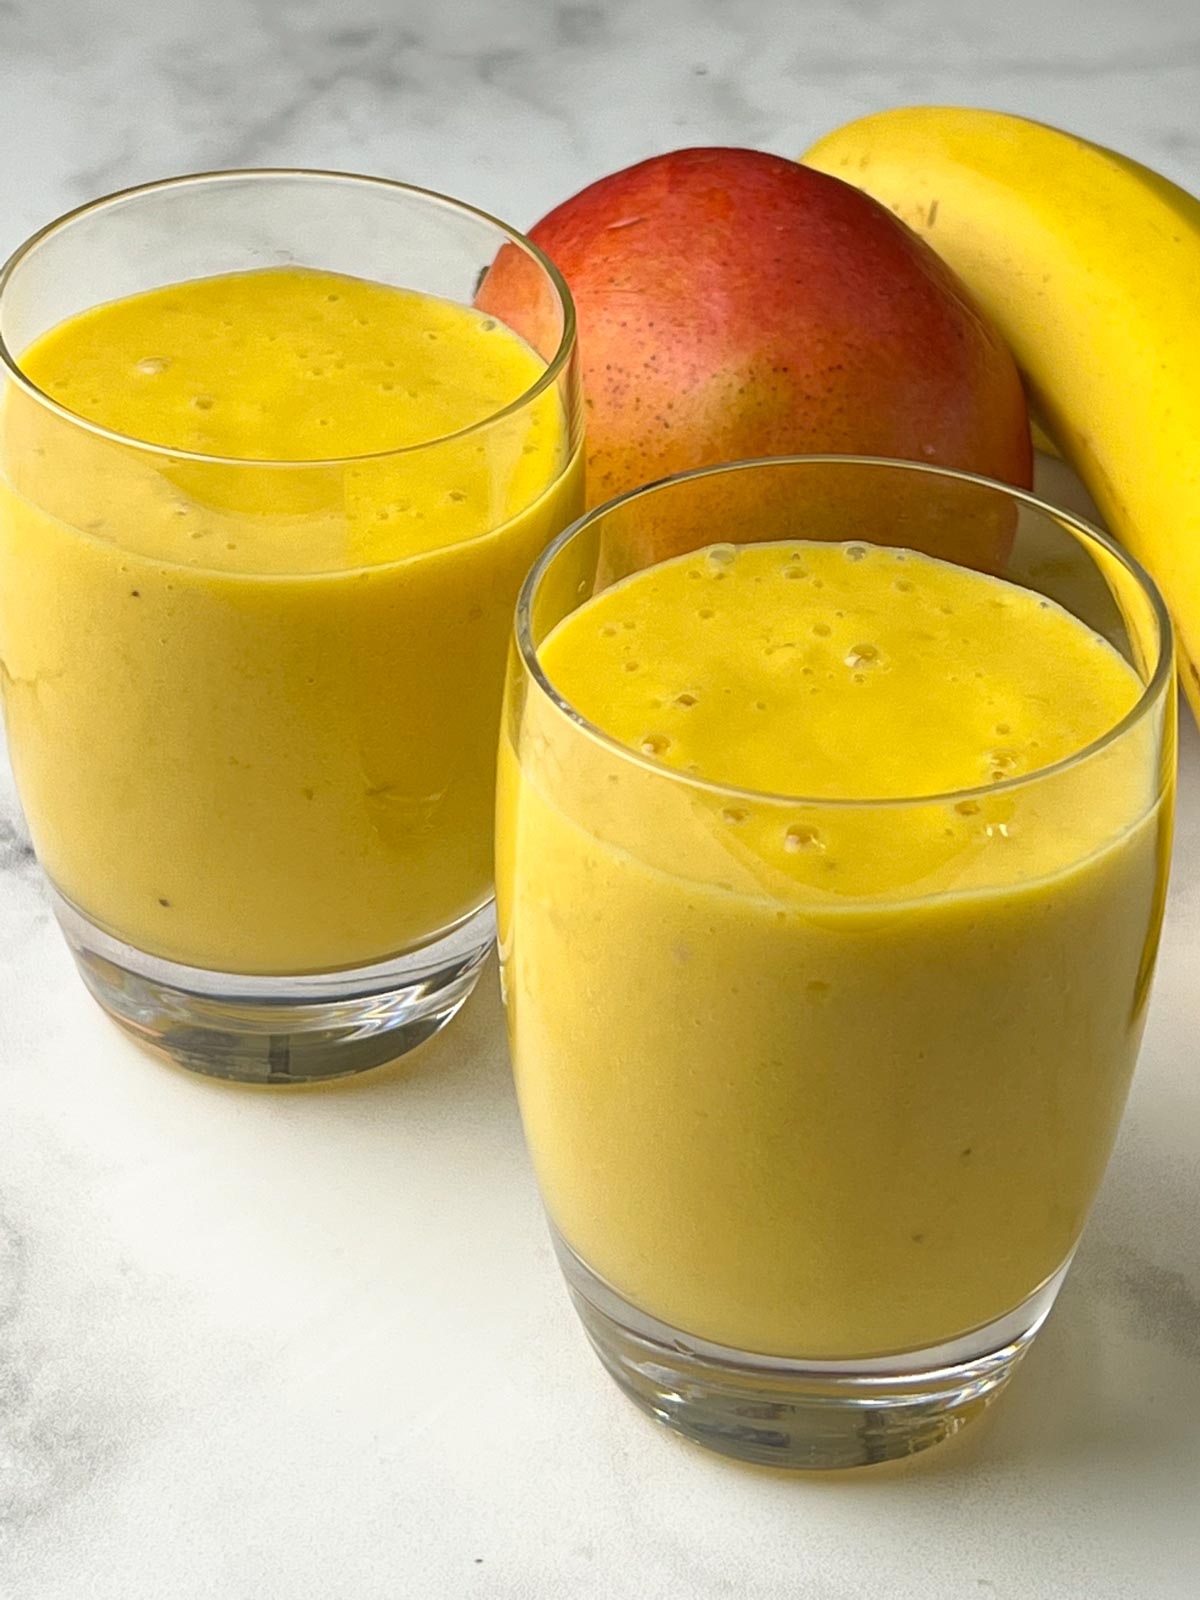 mango banana smoothie served in a serving glasses with whole mango and banana on the side